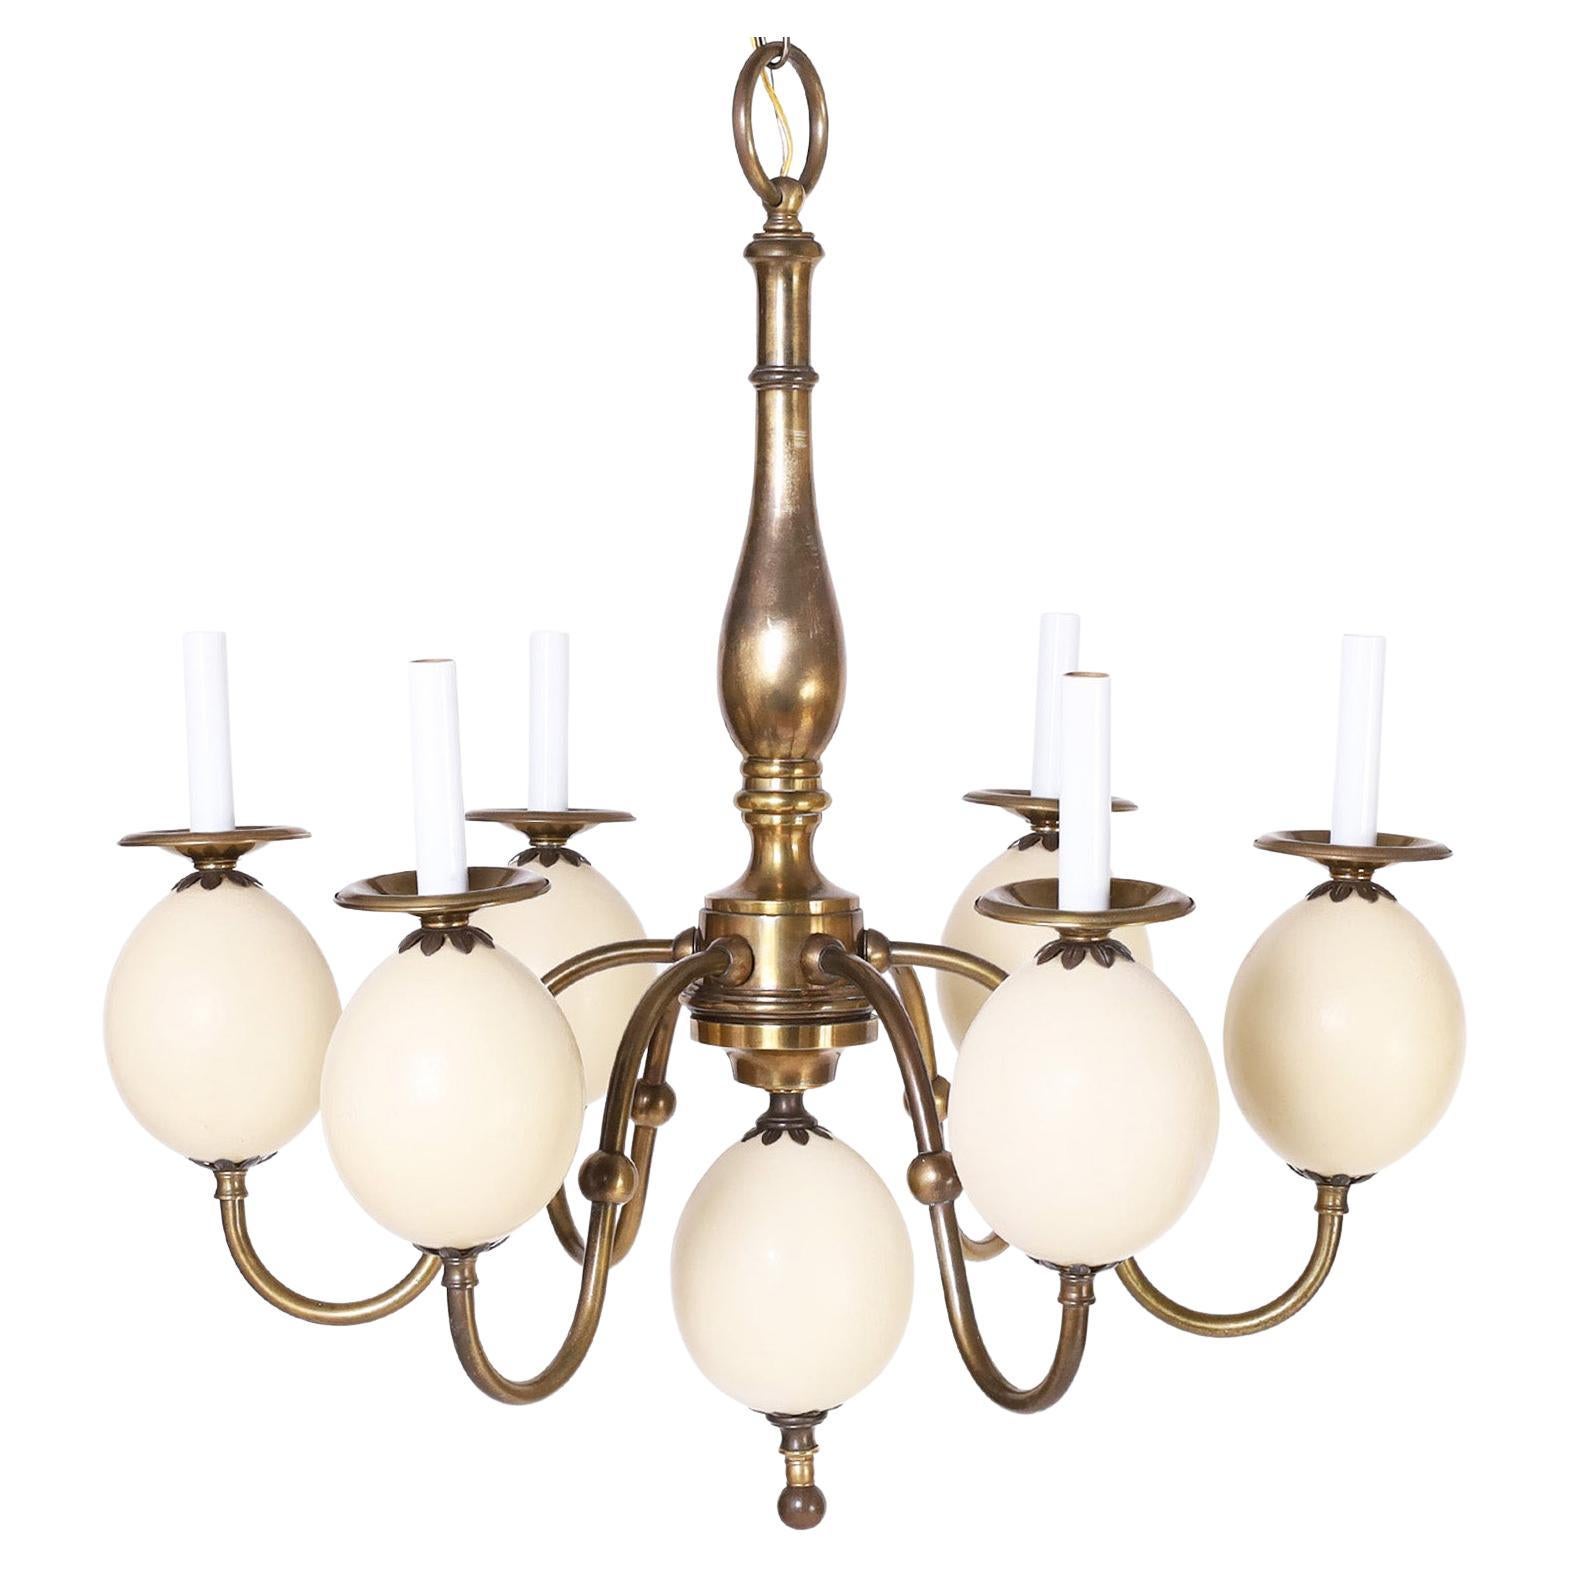 Brass and Faux Ostrich Egg Chandelier For Sale at 1stDibs | egg chandeliers